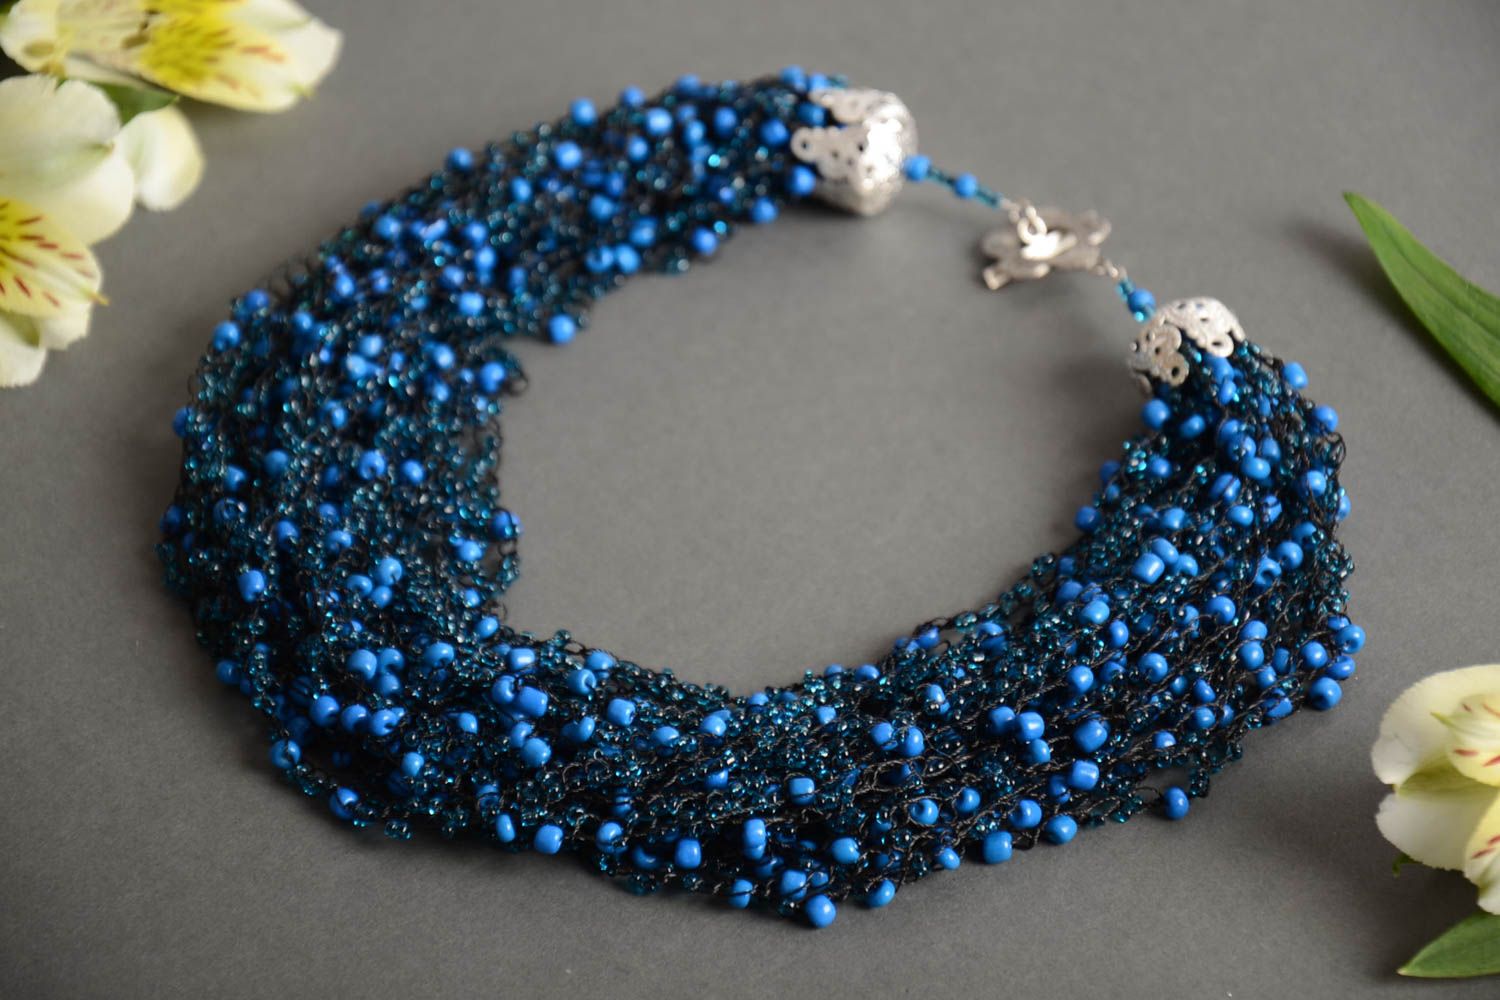 Handmade massive volume necklace crocheted of beads in dark blue color palette photo 1